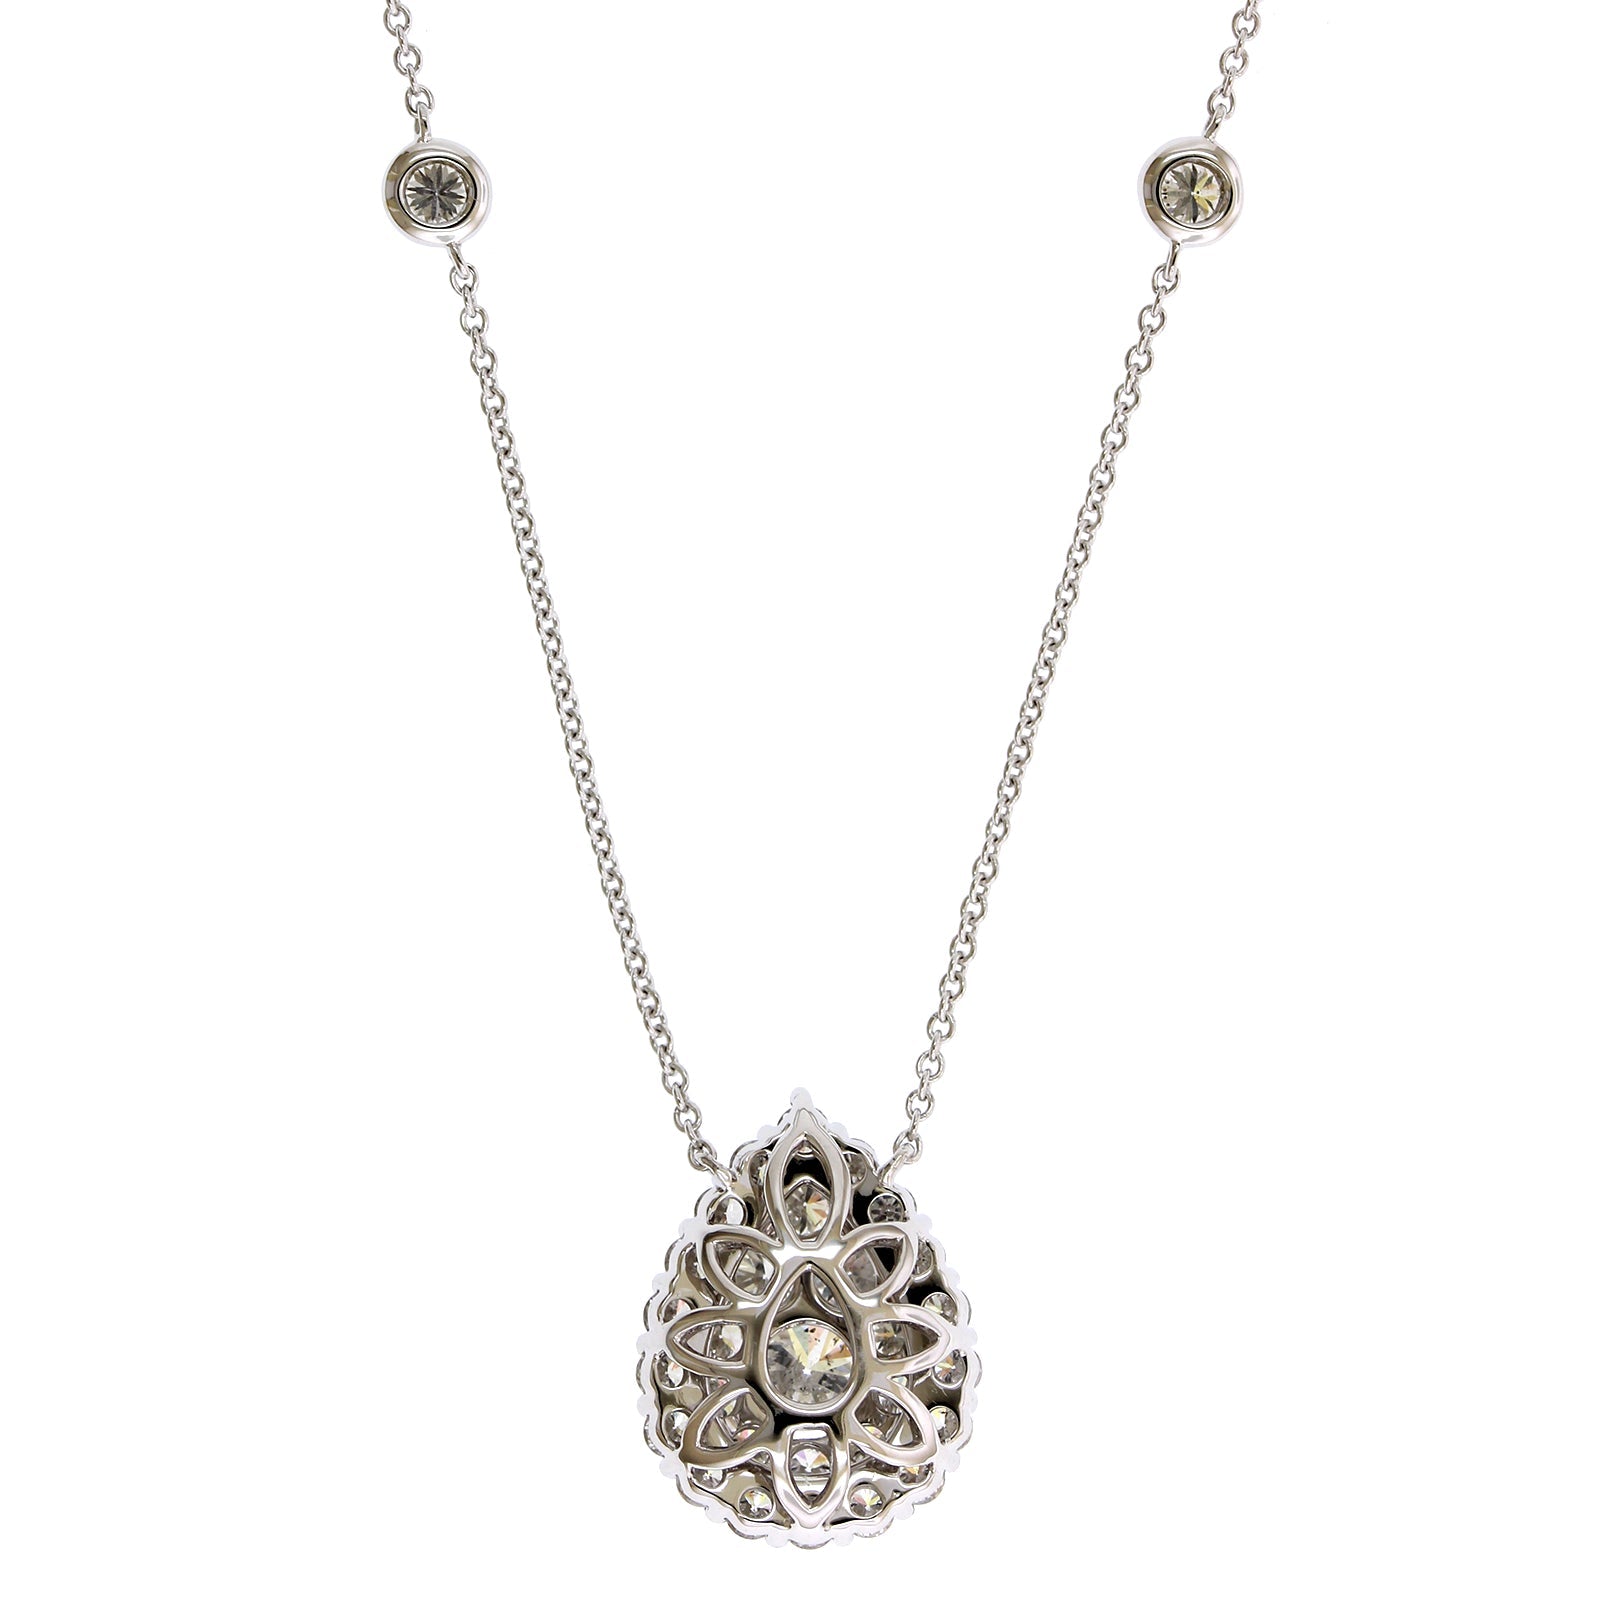 14K White Gold Diamond Cluster Pear Shaped Pendant Necklace